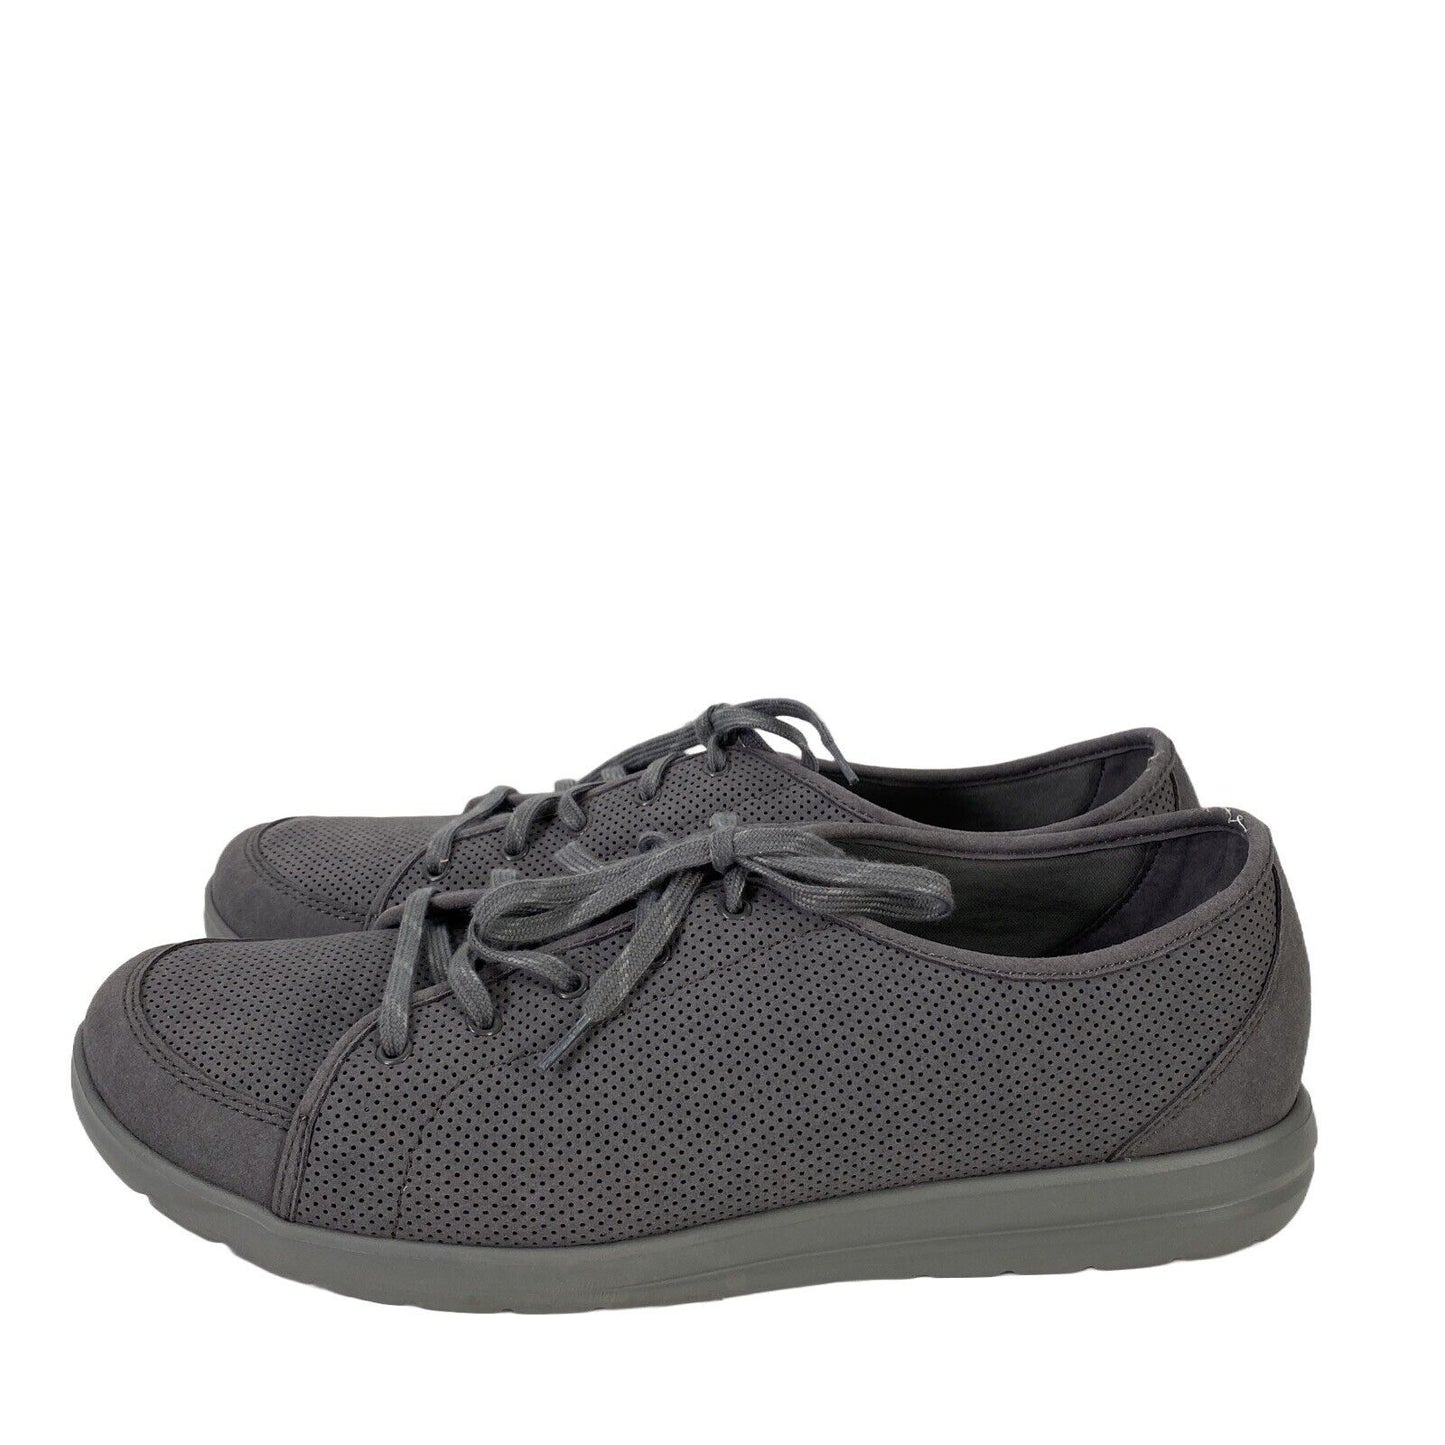 Clarks Cloudsteppers Women's Gray Perforated Lace Up Sneakers - 12M